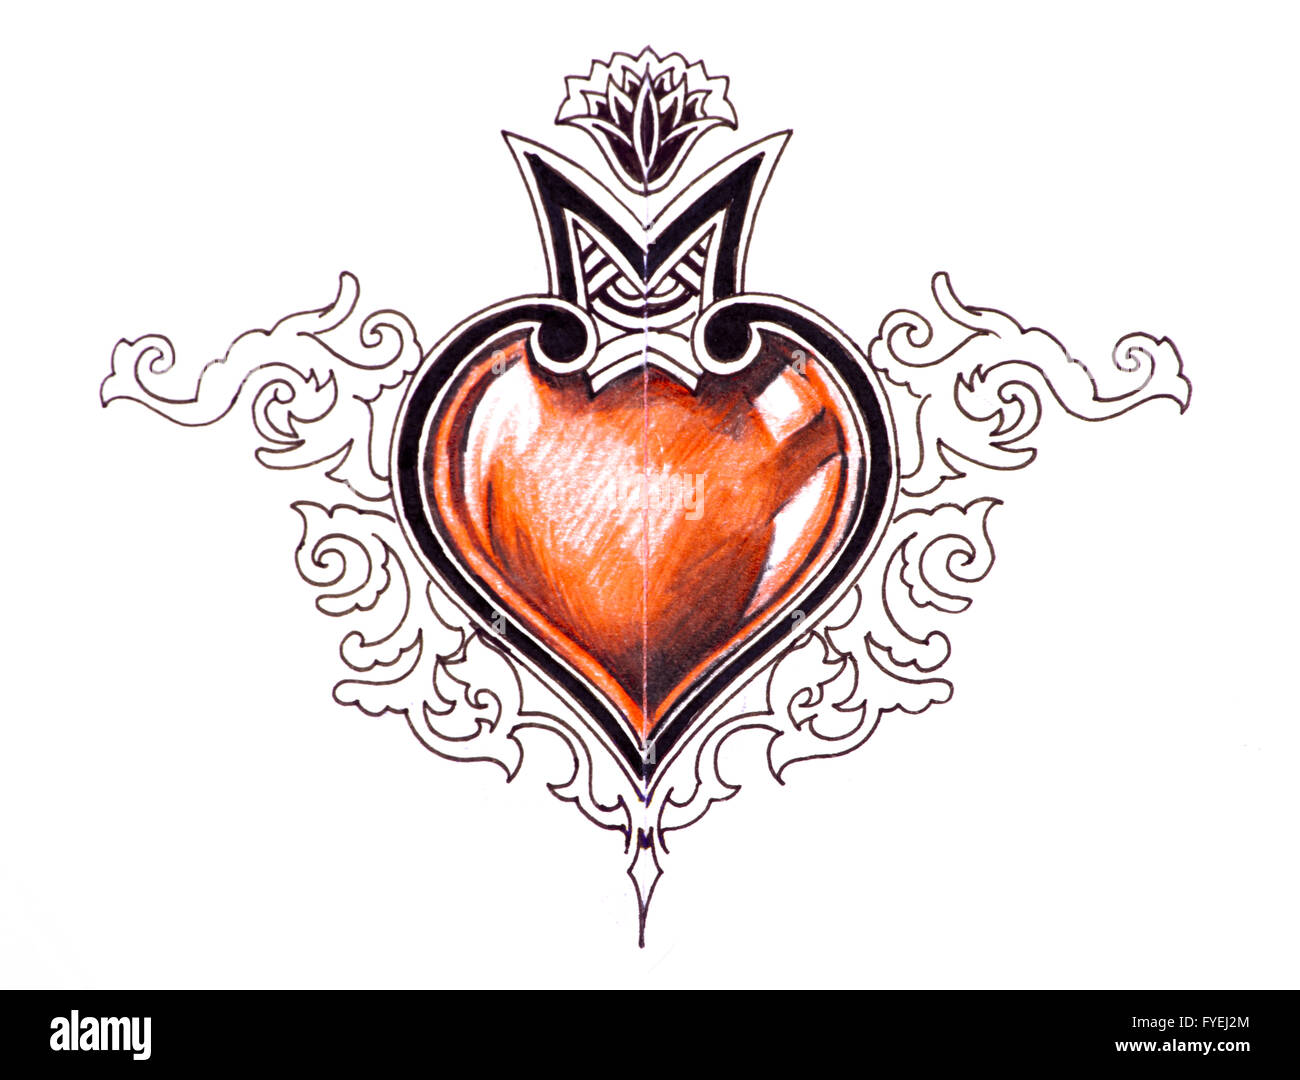 Heart Tattoo Arm Photos and Images | Shutterstock